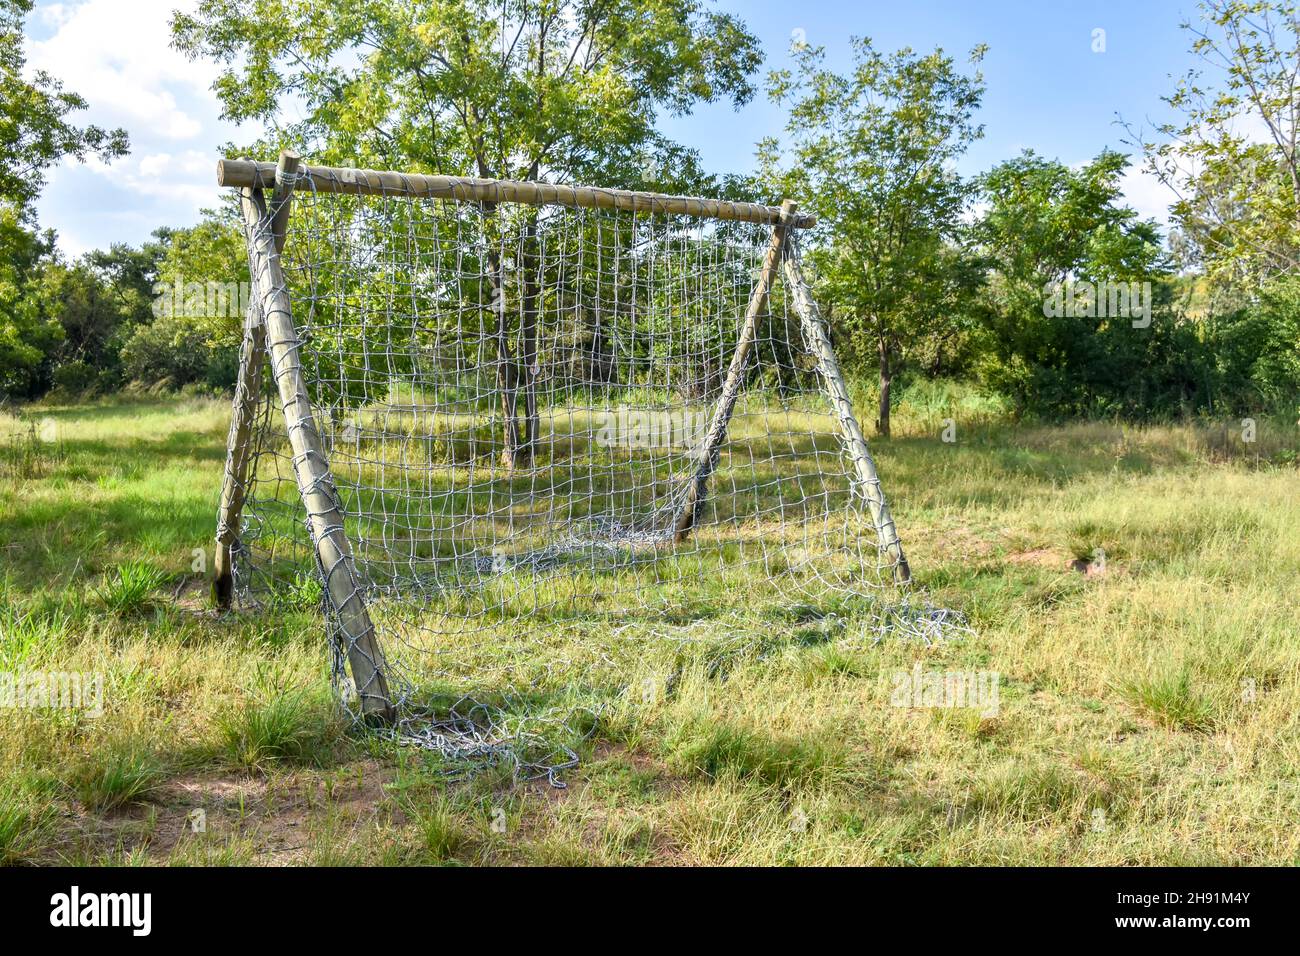 A climbing rack made of wooden poles and a net made for an obstacle course in a grass field to test the endurance and agility of sports people and oth Stock Photo